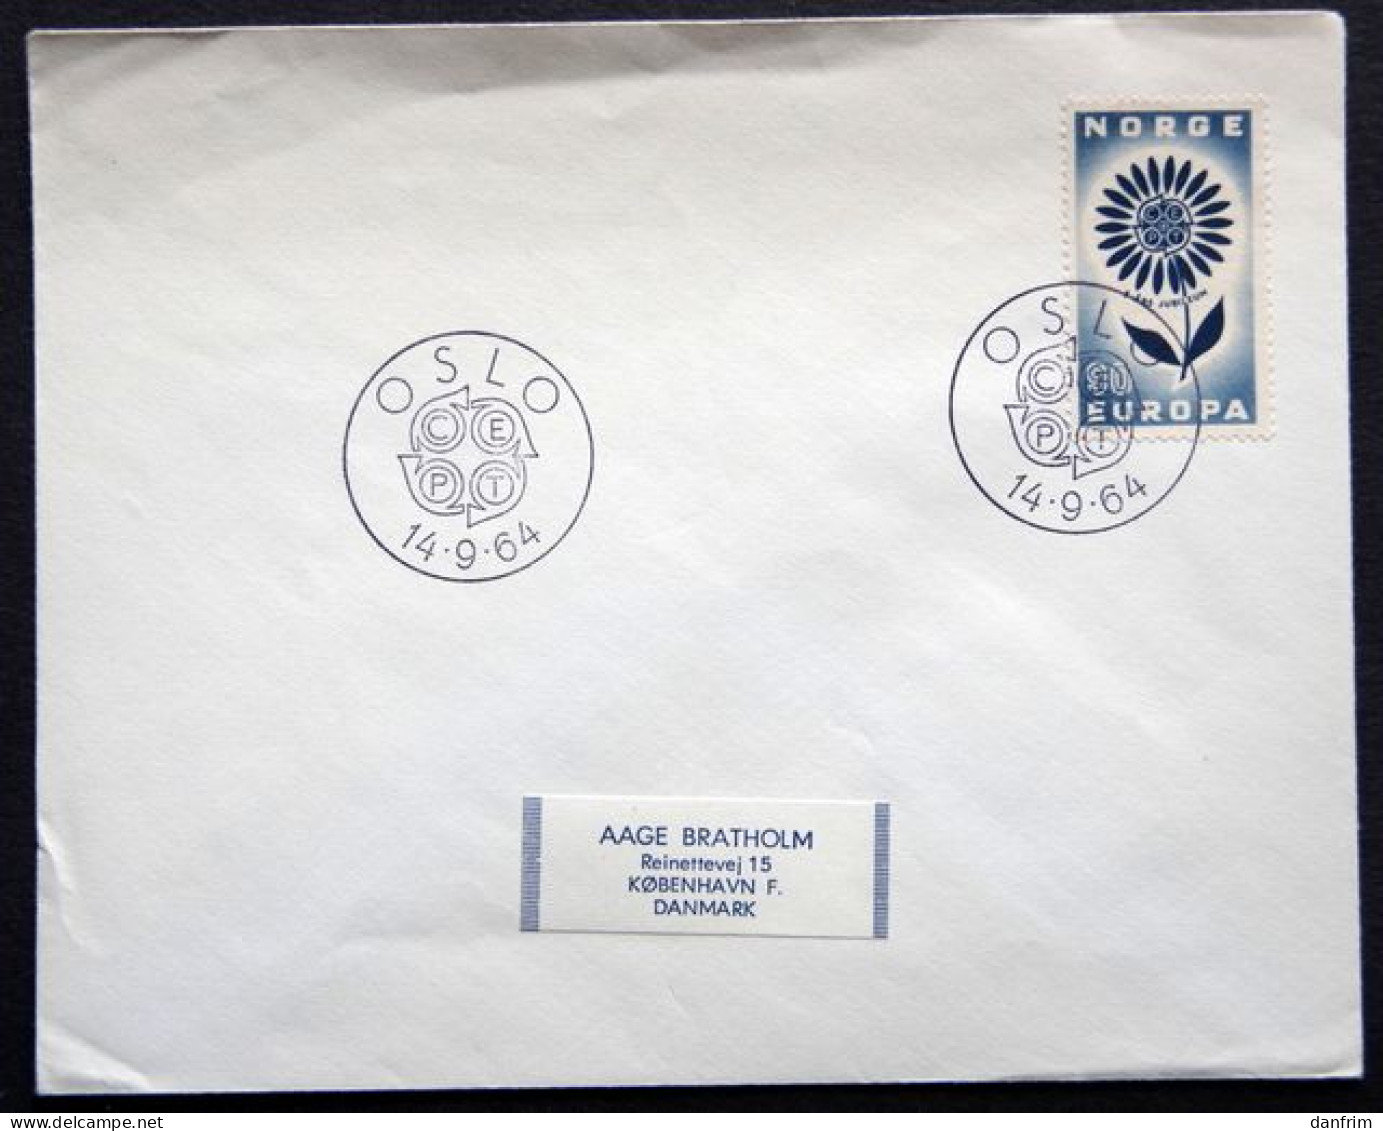 Norway 1964 EUROPA. MiNr.521  (lot 2275 ) - FDC